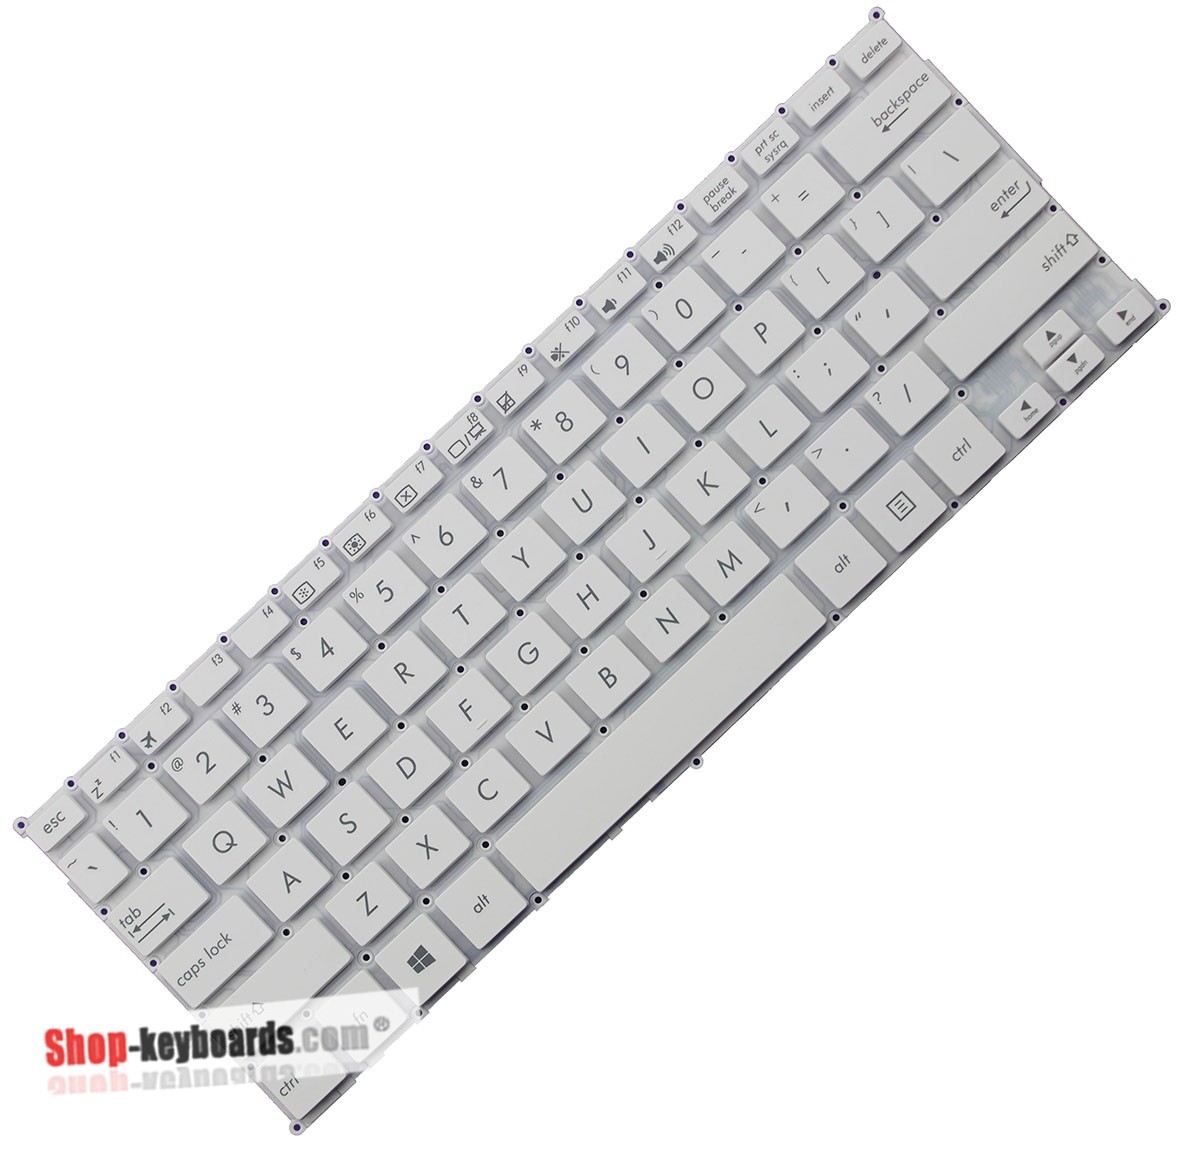 Asus 0KNB0-1128FR00 Keyboard replacement